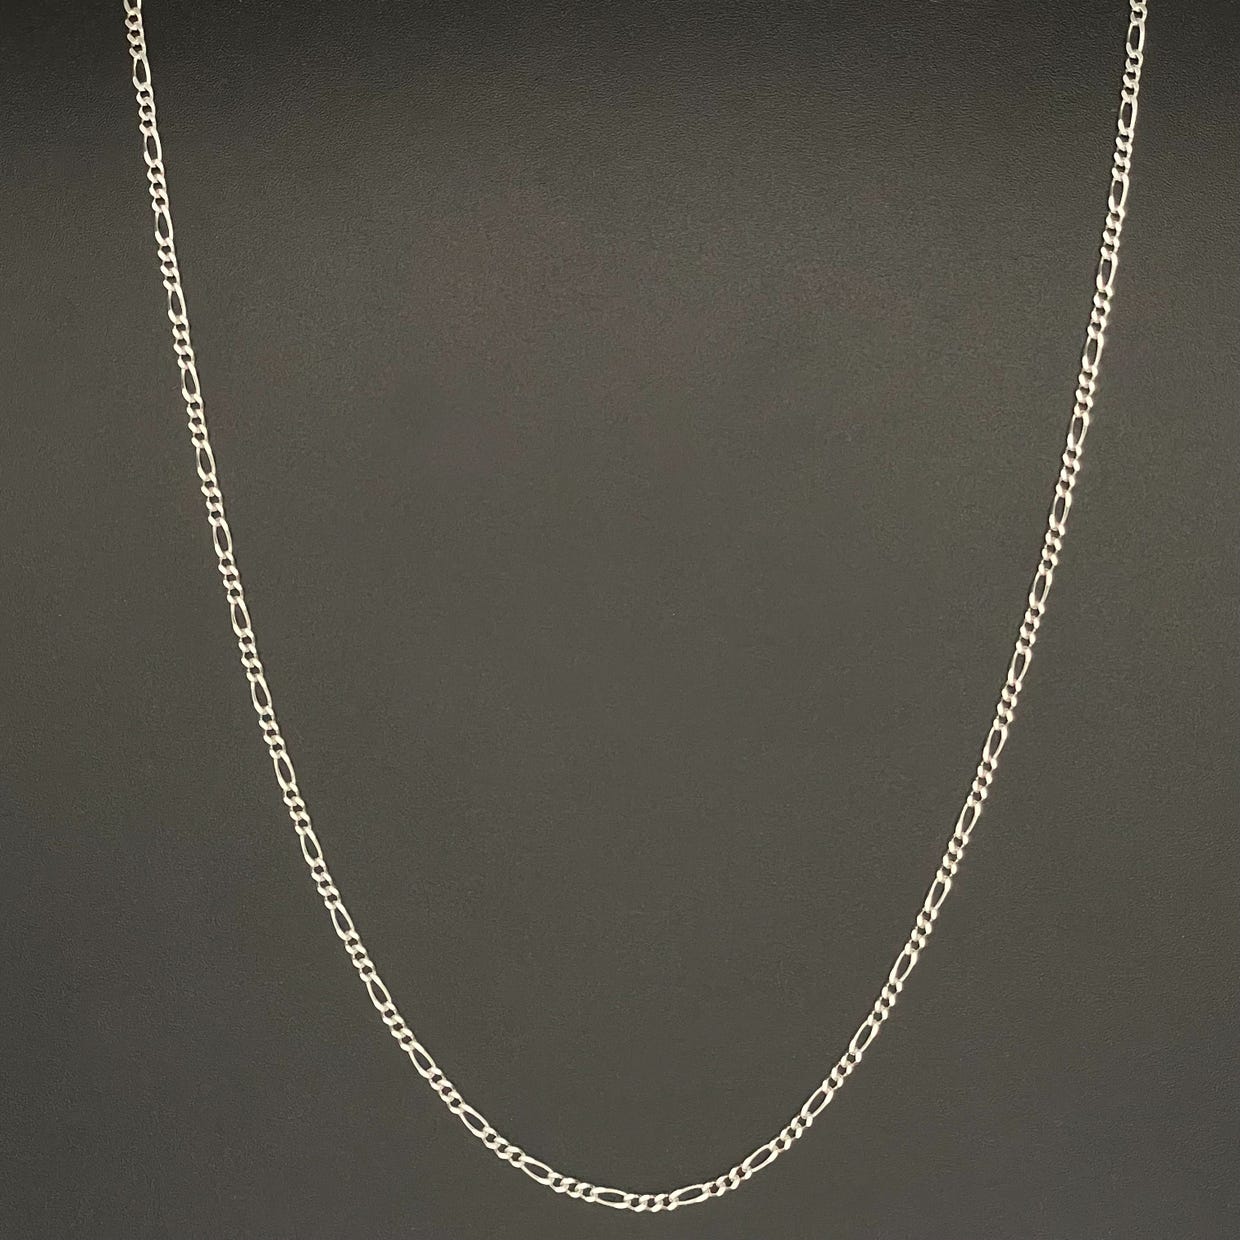 Silver chain necklace on a black background.